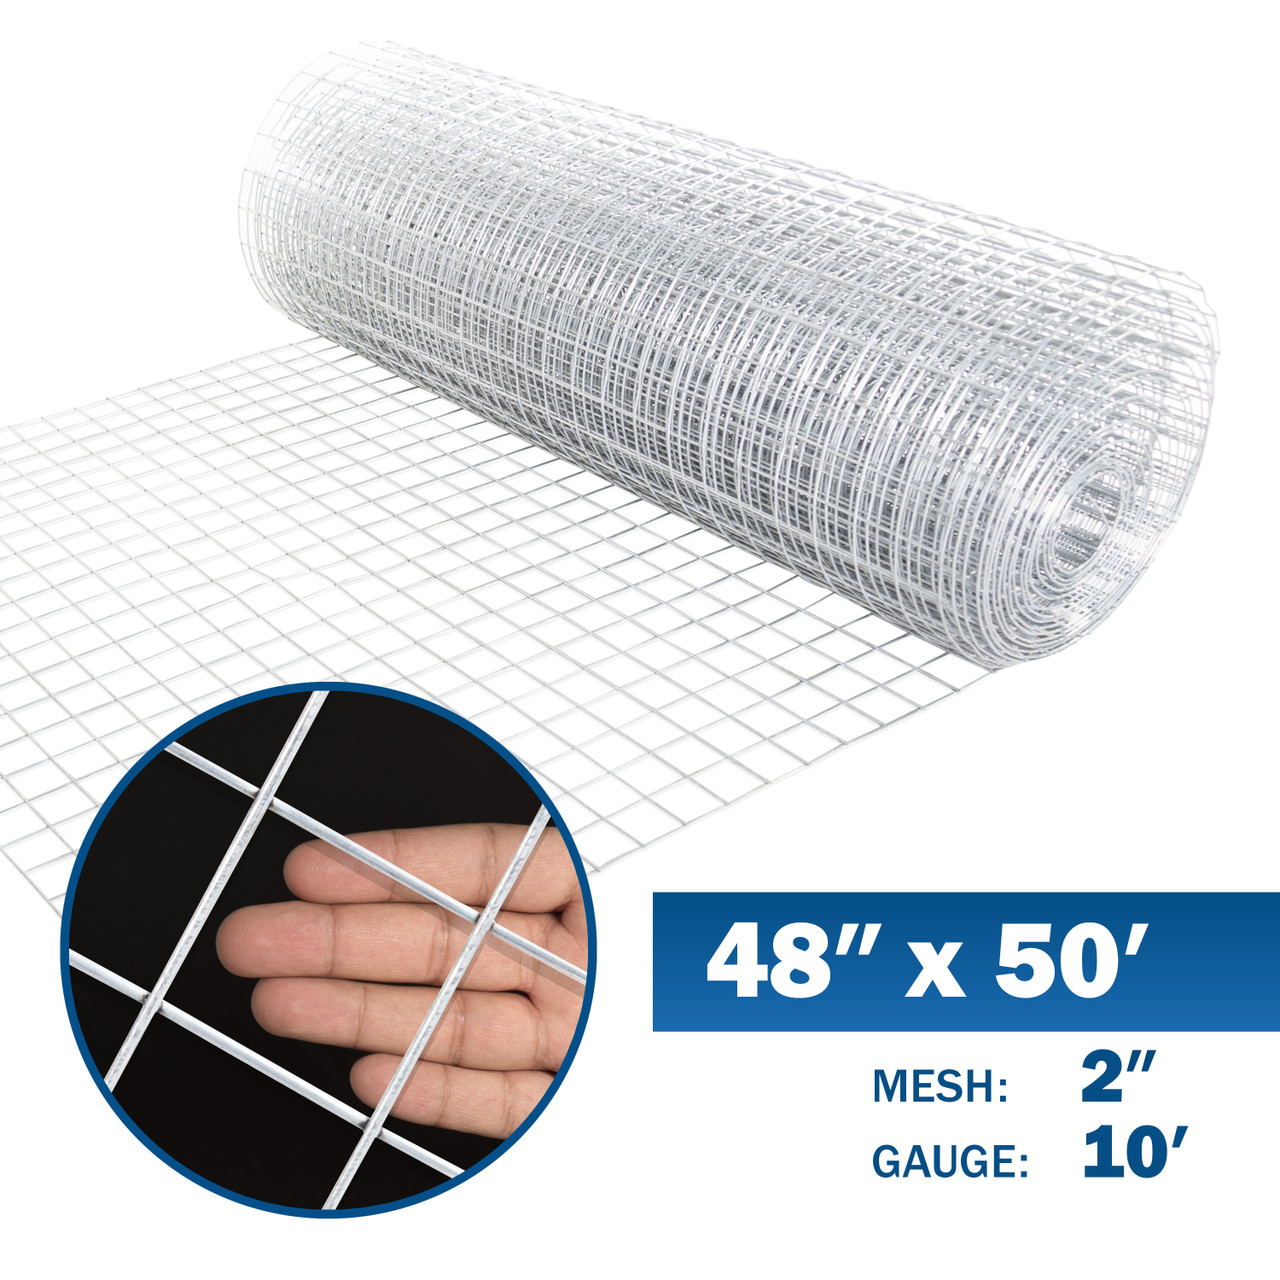 Fencer Wire 1/2 in. x 3 ft. x 100 ft. 19-Gauge Hardware Cloth